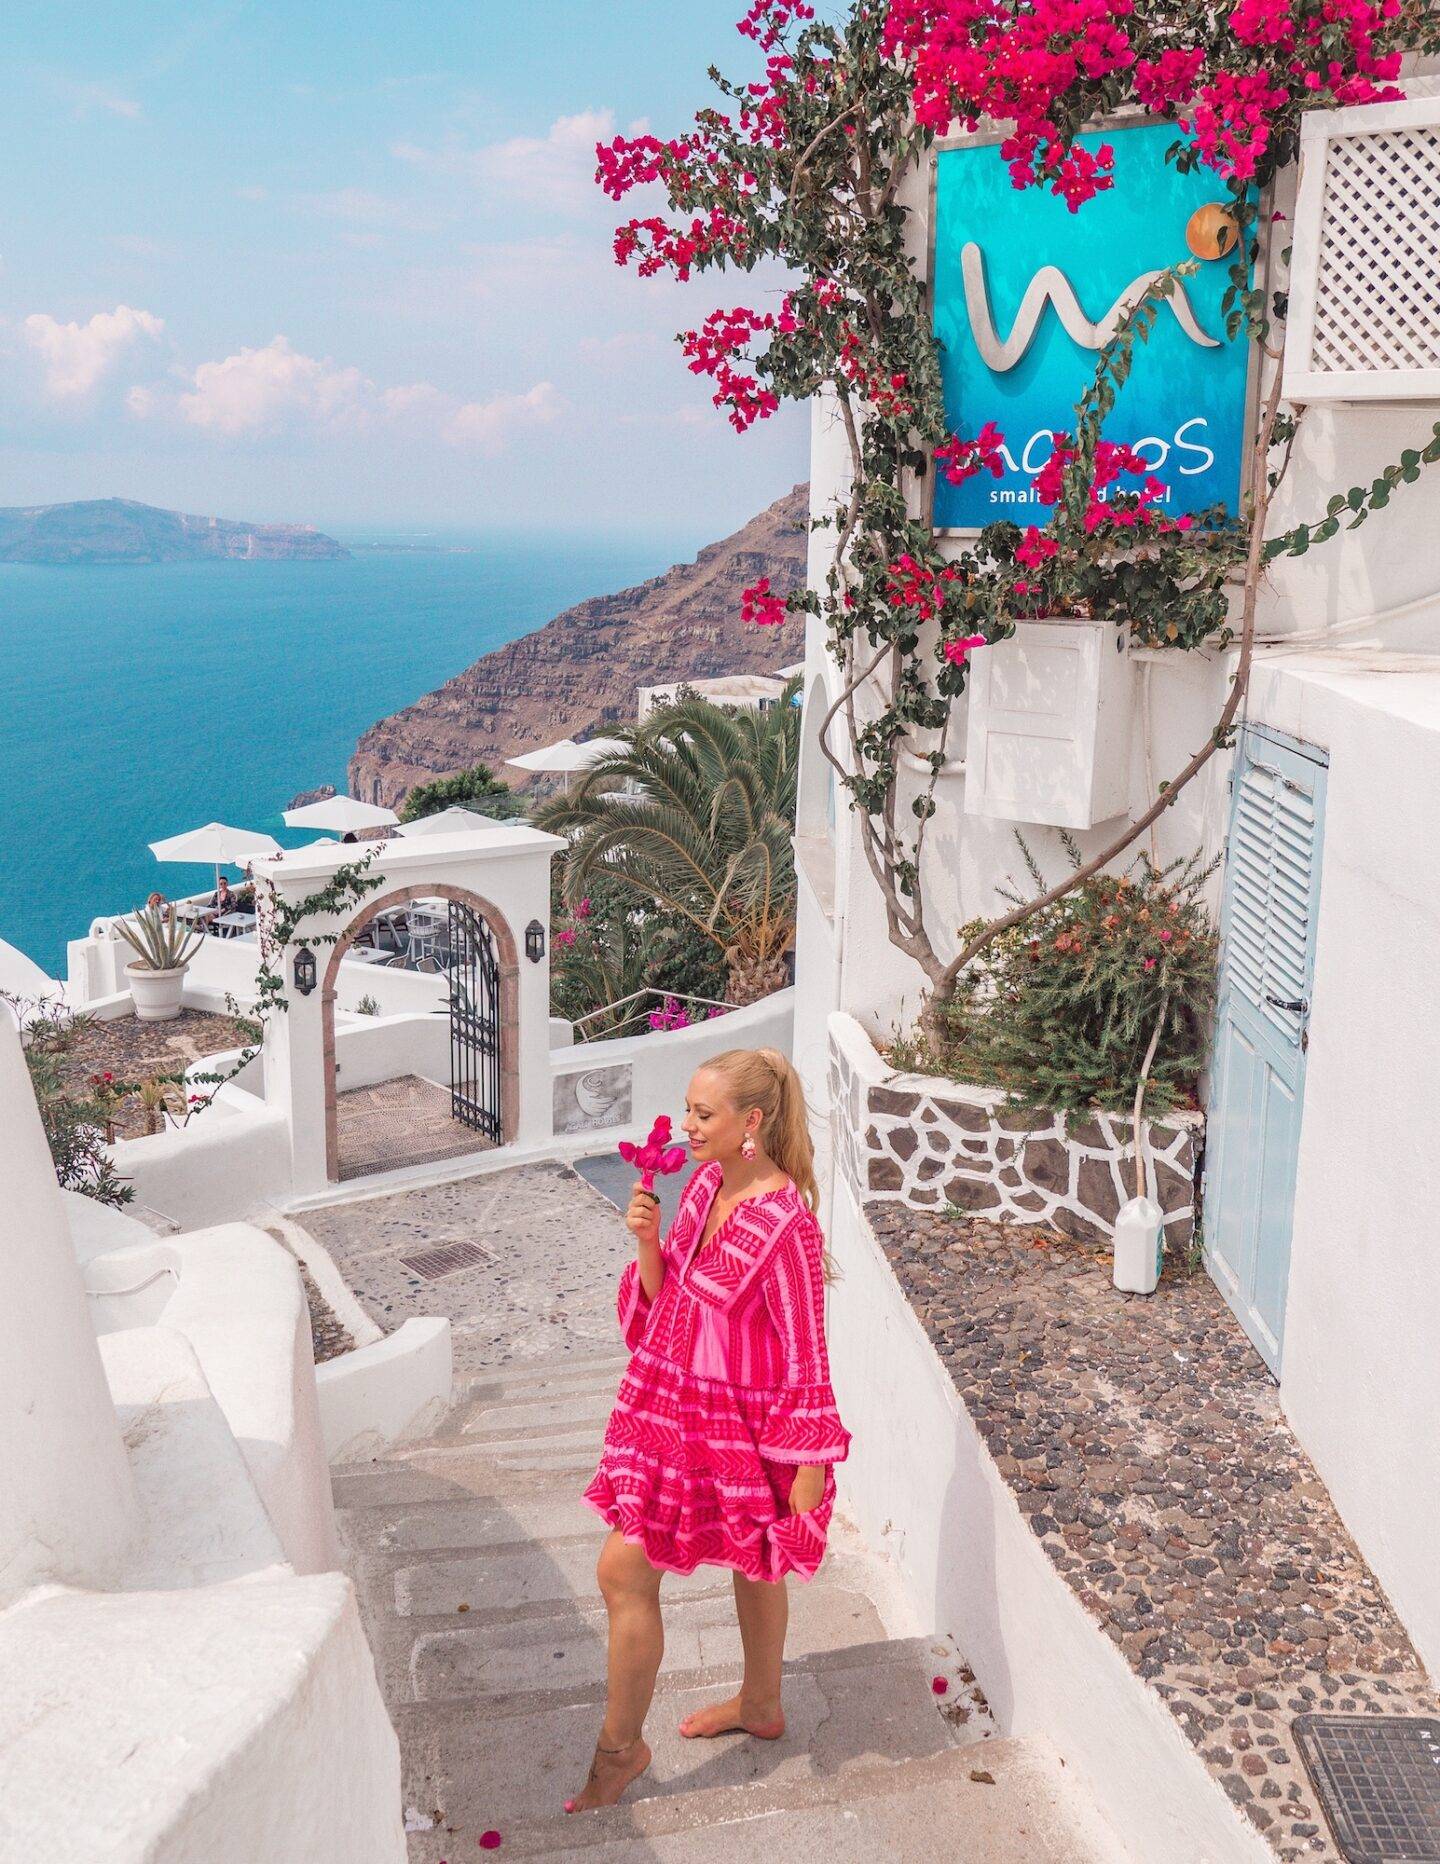 The best photo spots and most instagrammable places in Santorini: Unique hotel entrances of Fira. Click the photo to see the rest of my list of the best instagram photo spots in Santorini!